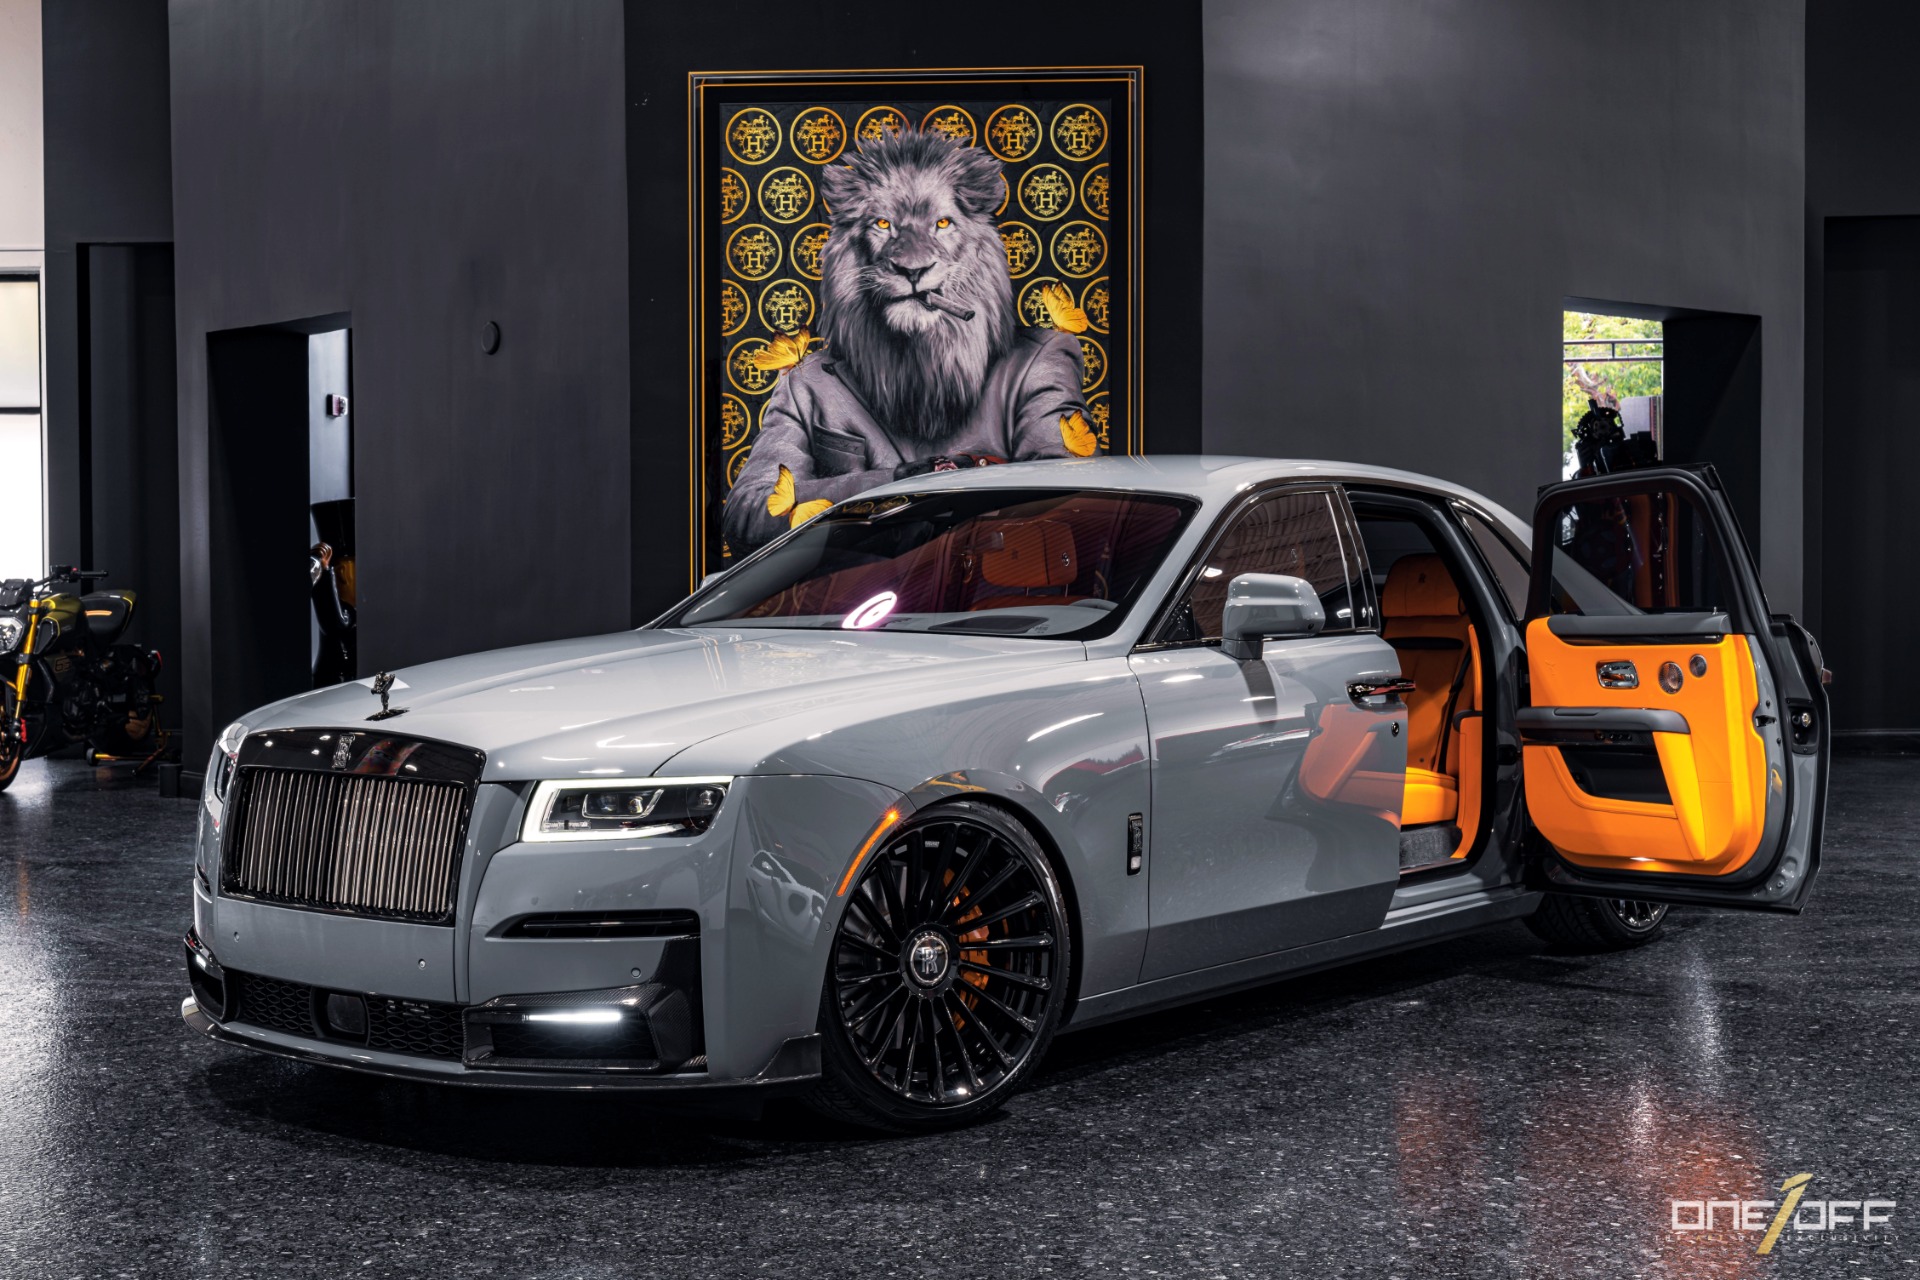 Custom Rolls Royce Ghost wrapped by West Coast Customs in Avery Dennison  Conform Chrome Silver  Voiture Réparation automobile Automobile